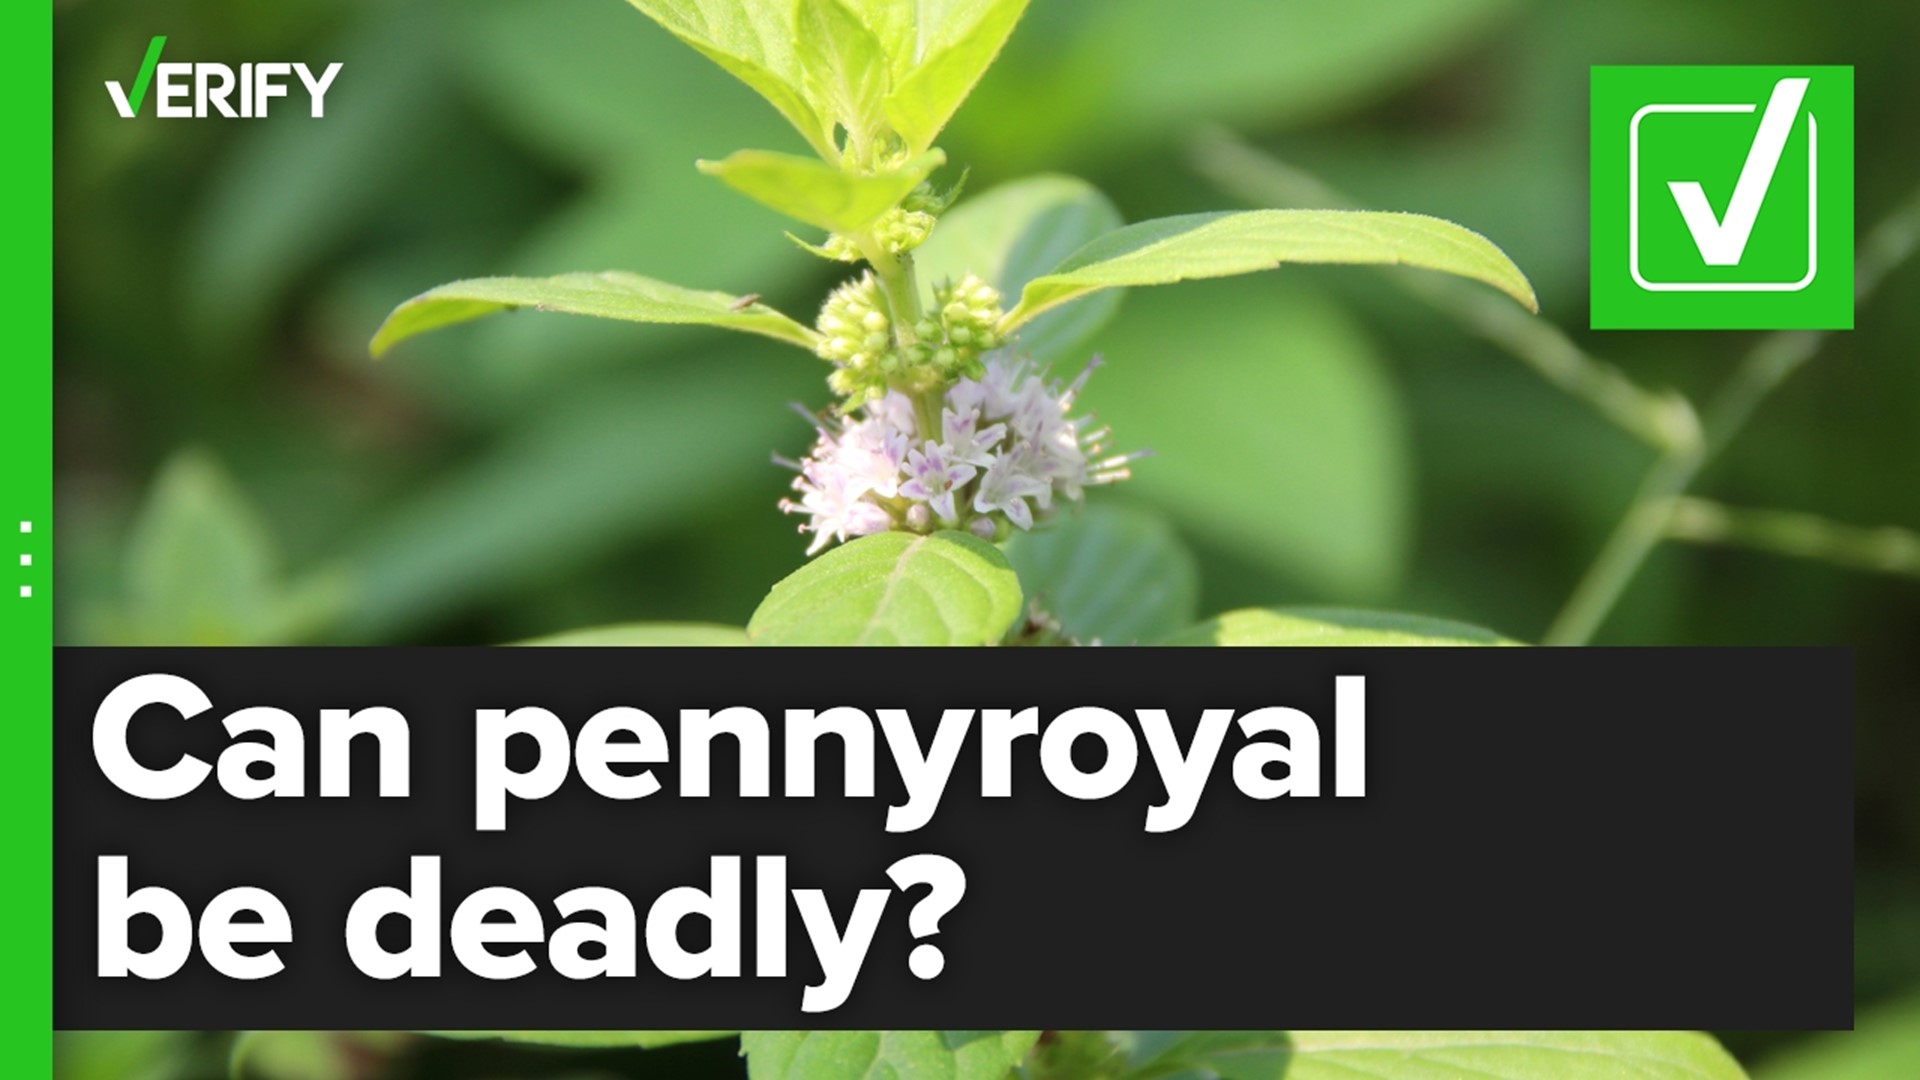 A video on TikTok implied a plant called pennyroyal could cause an abortion, but the plant is dangerous and even a small amount can cause death.